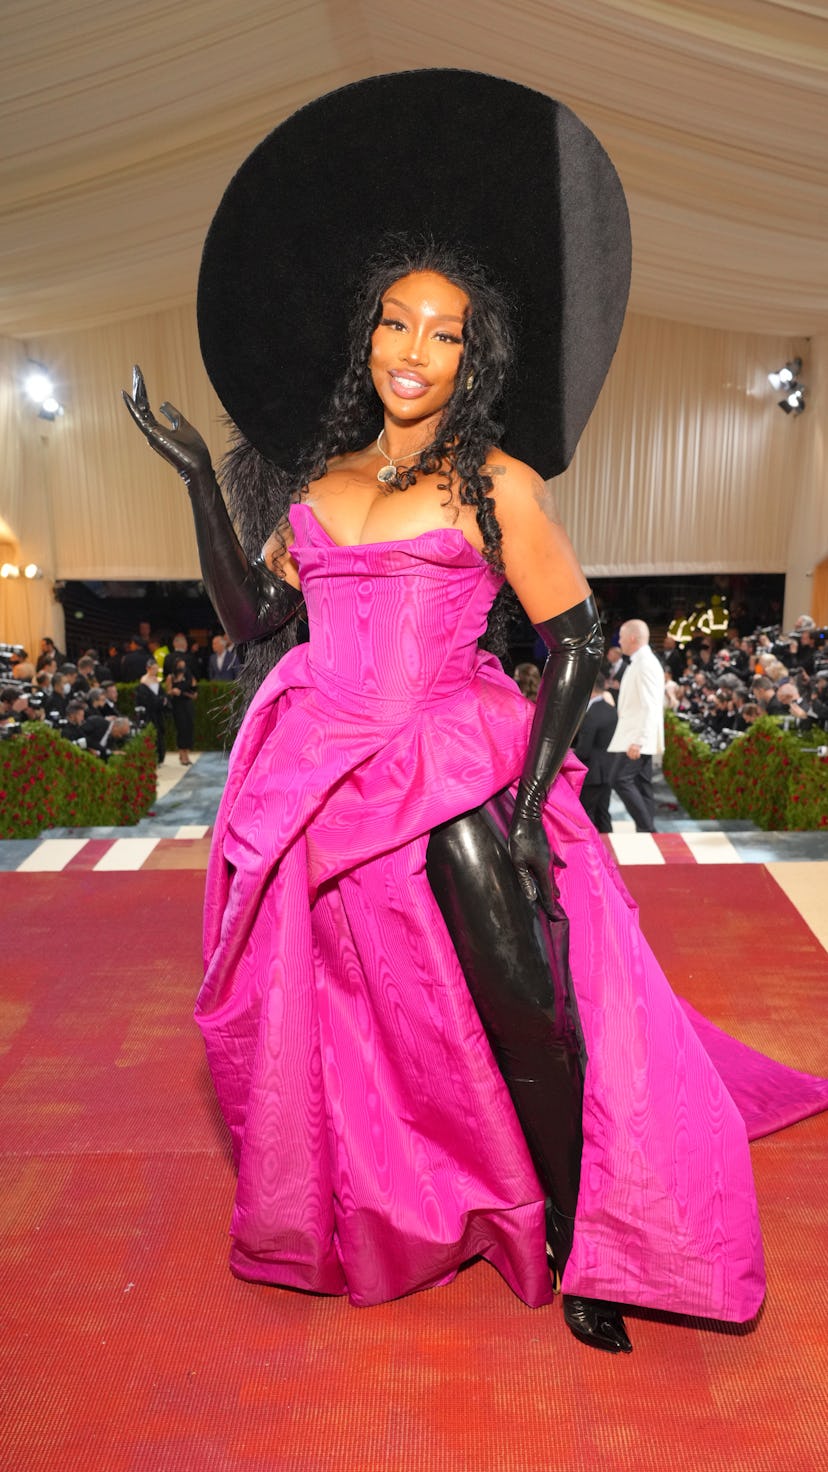 Sza at the Met Gala in a corset gown.